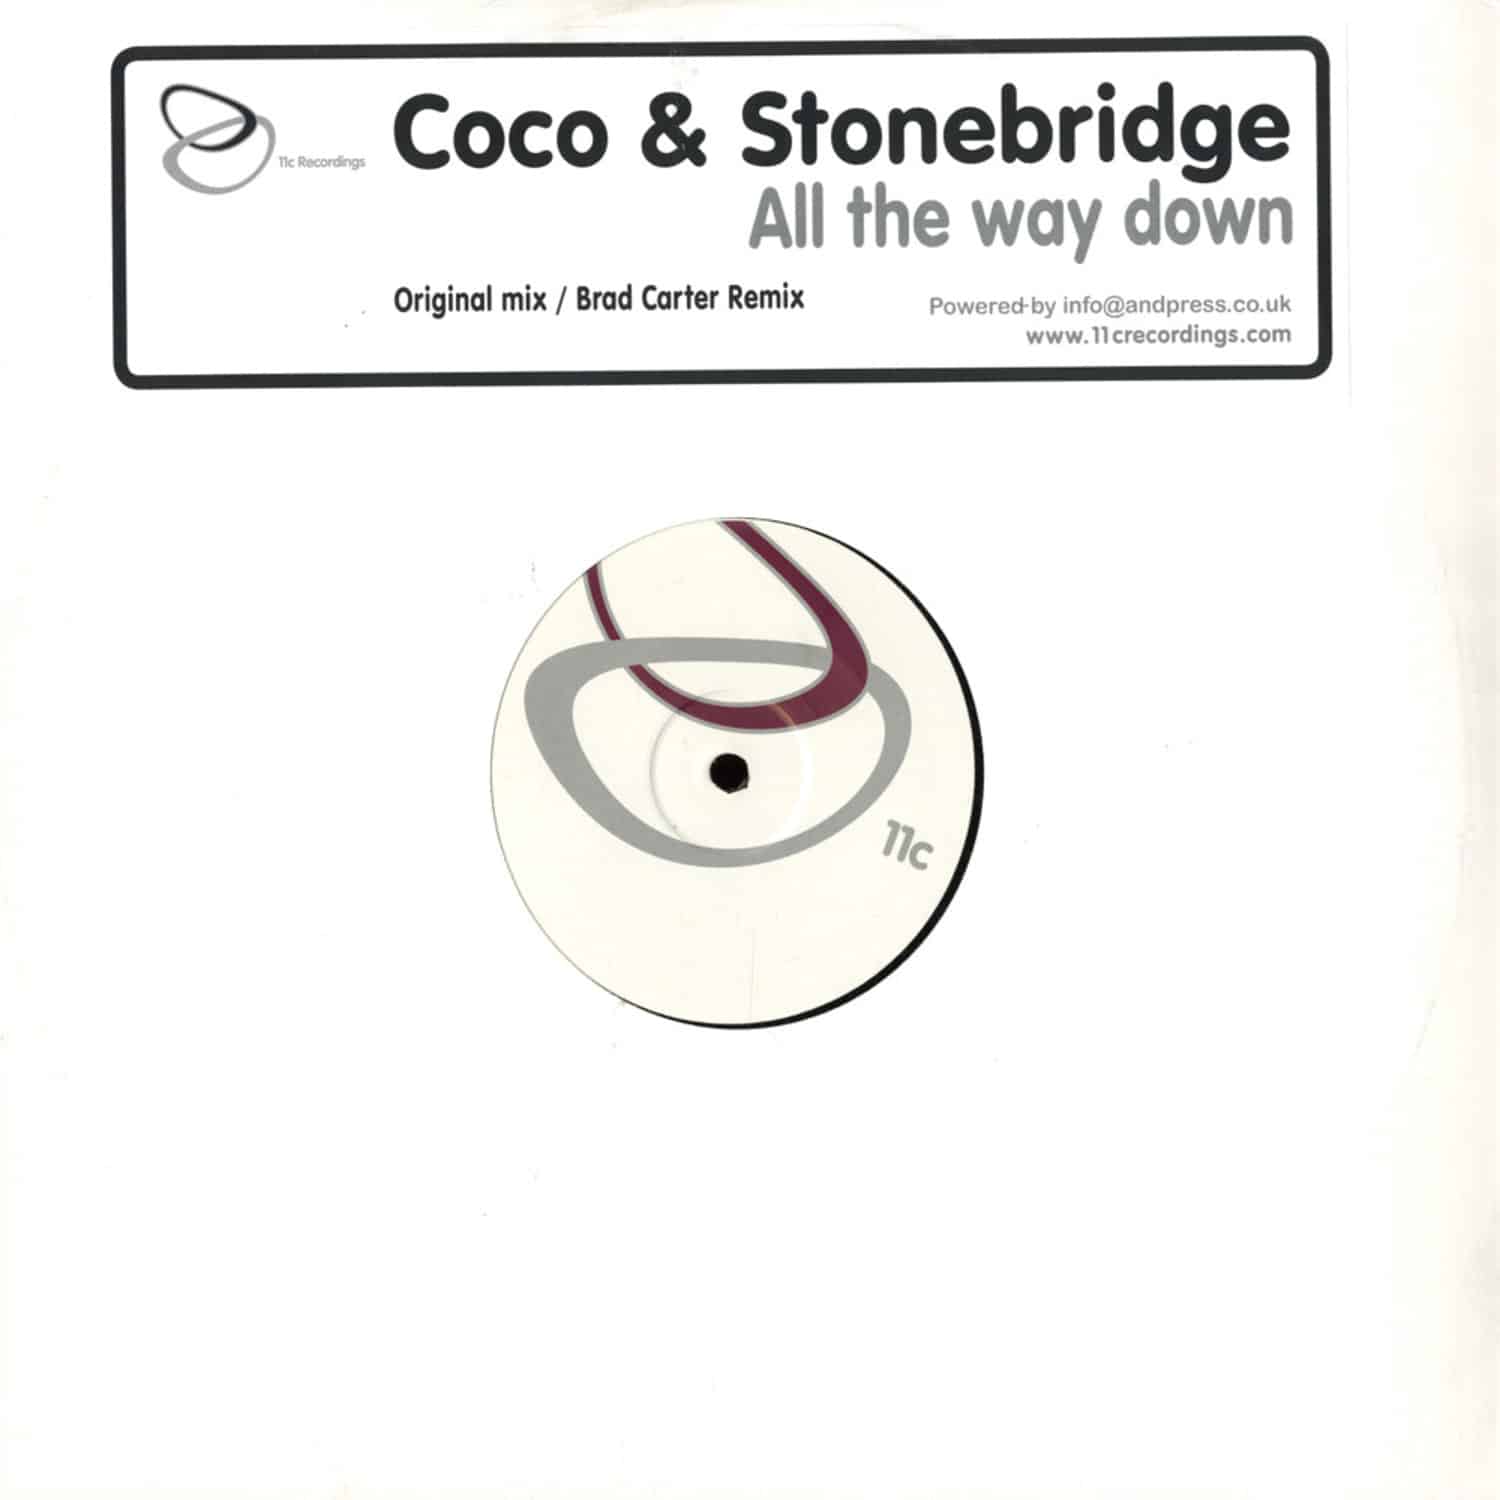 Coco and Stonebridge - ALL THE WAY DOWN